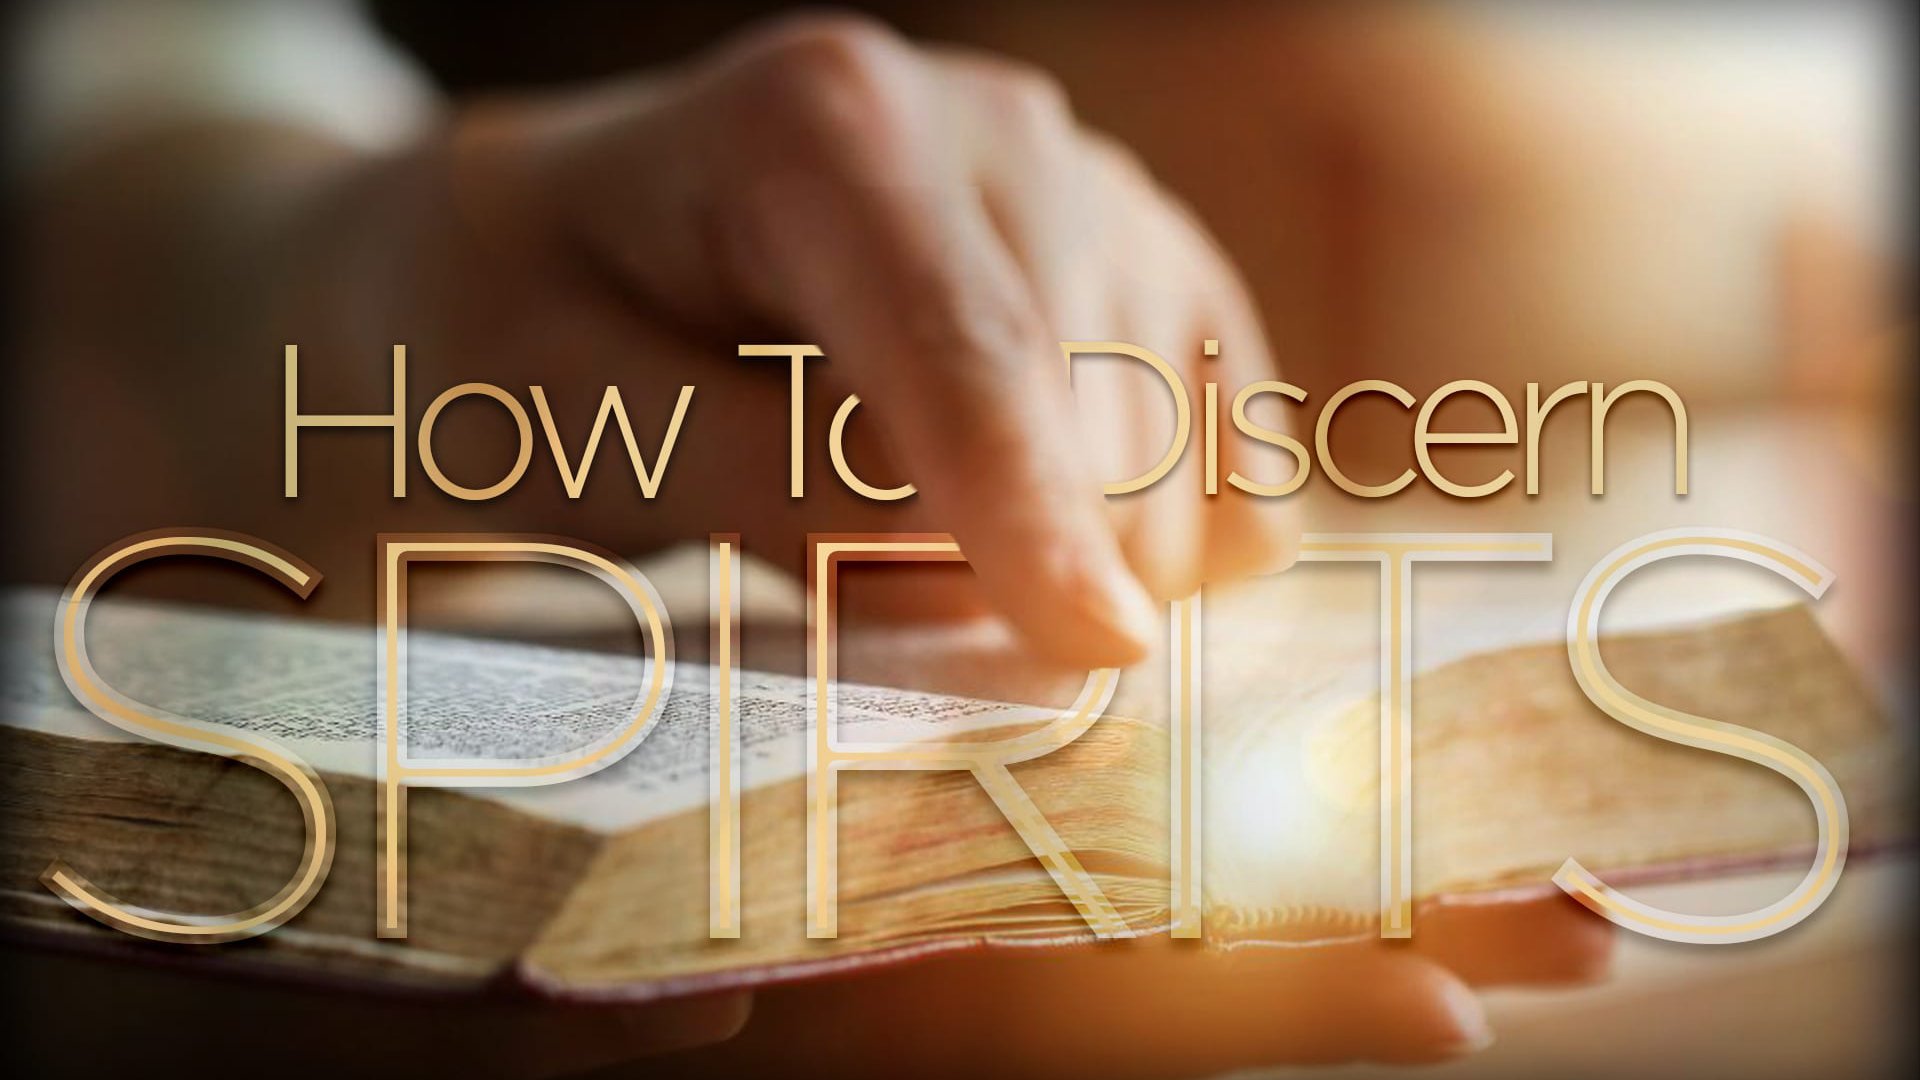 WHAT IS DISCERNMENT AND HOW SHOULD WE USE IT?